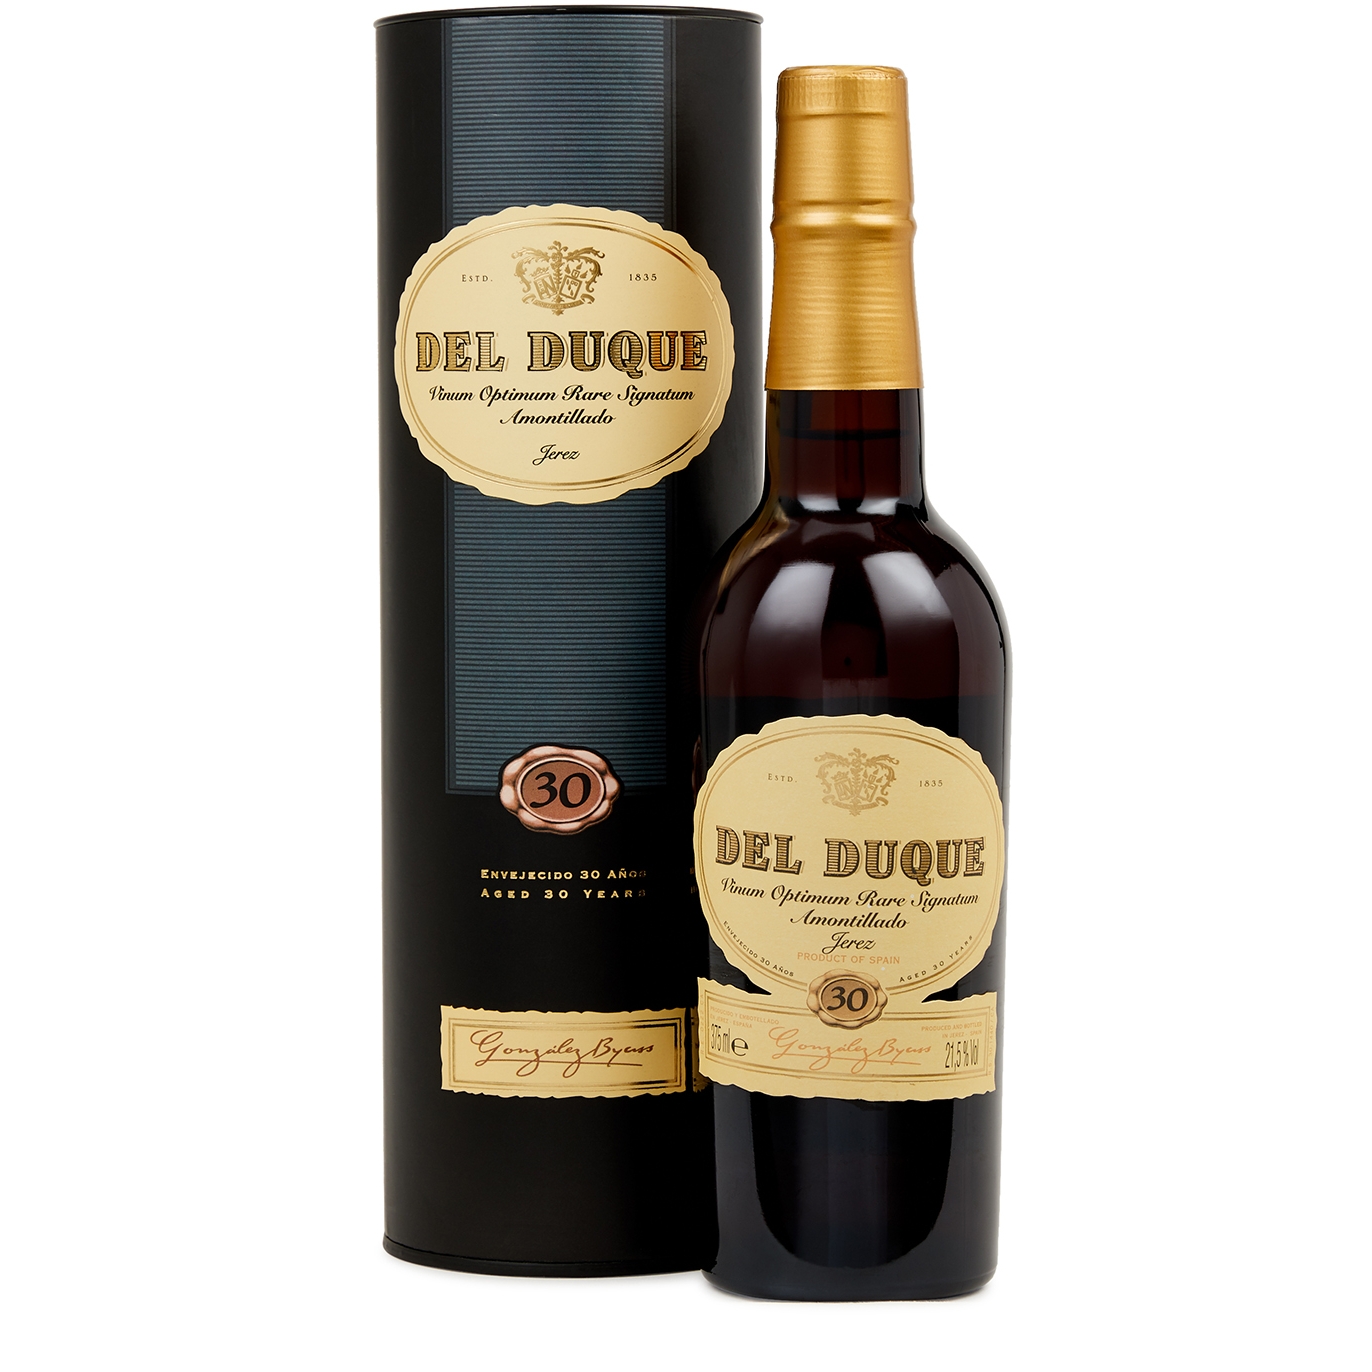 González Byass Del Duque 30 Year Old Amontillado Sherry Half Bottle 375ml Port And Fortified Wine